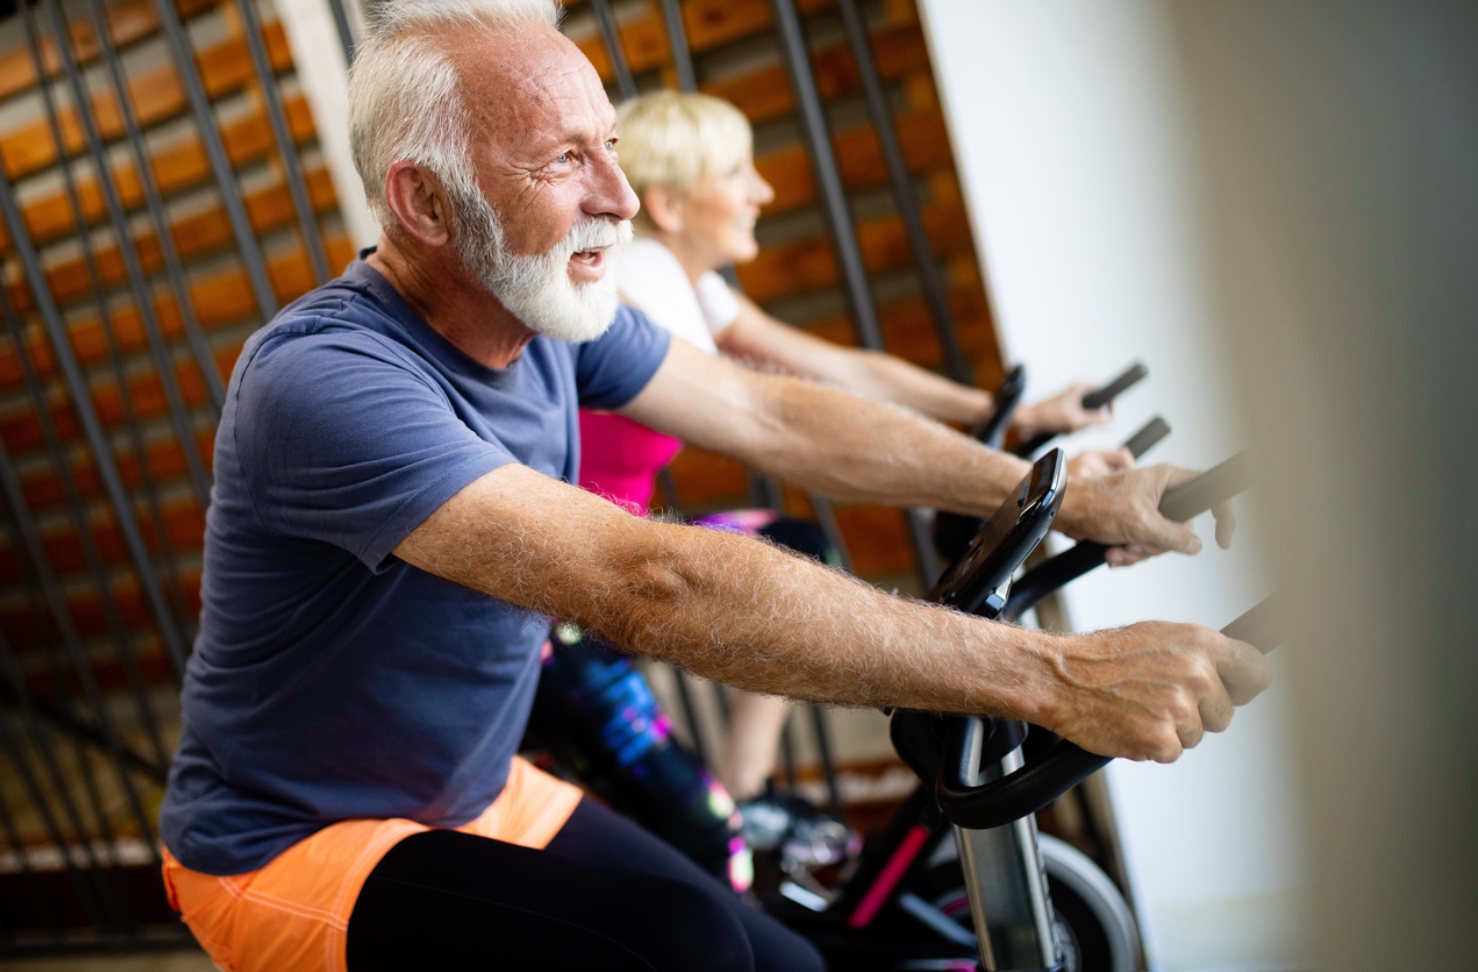 Study Shows Link Between Lifetime of Physical Activity, Brain Function at an Older Age